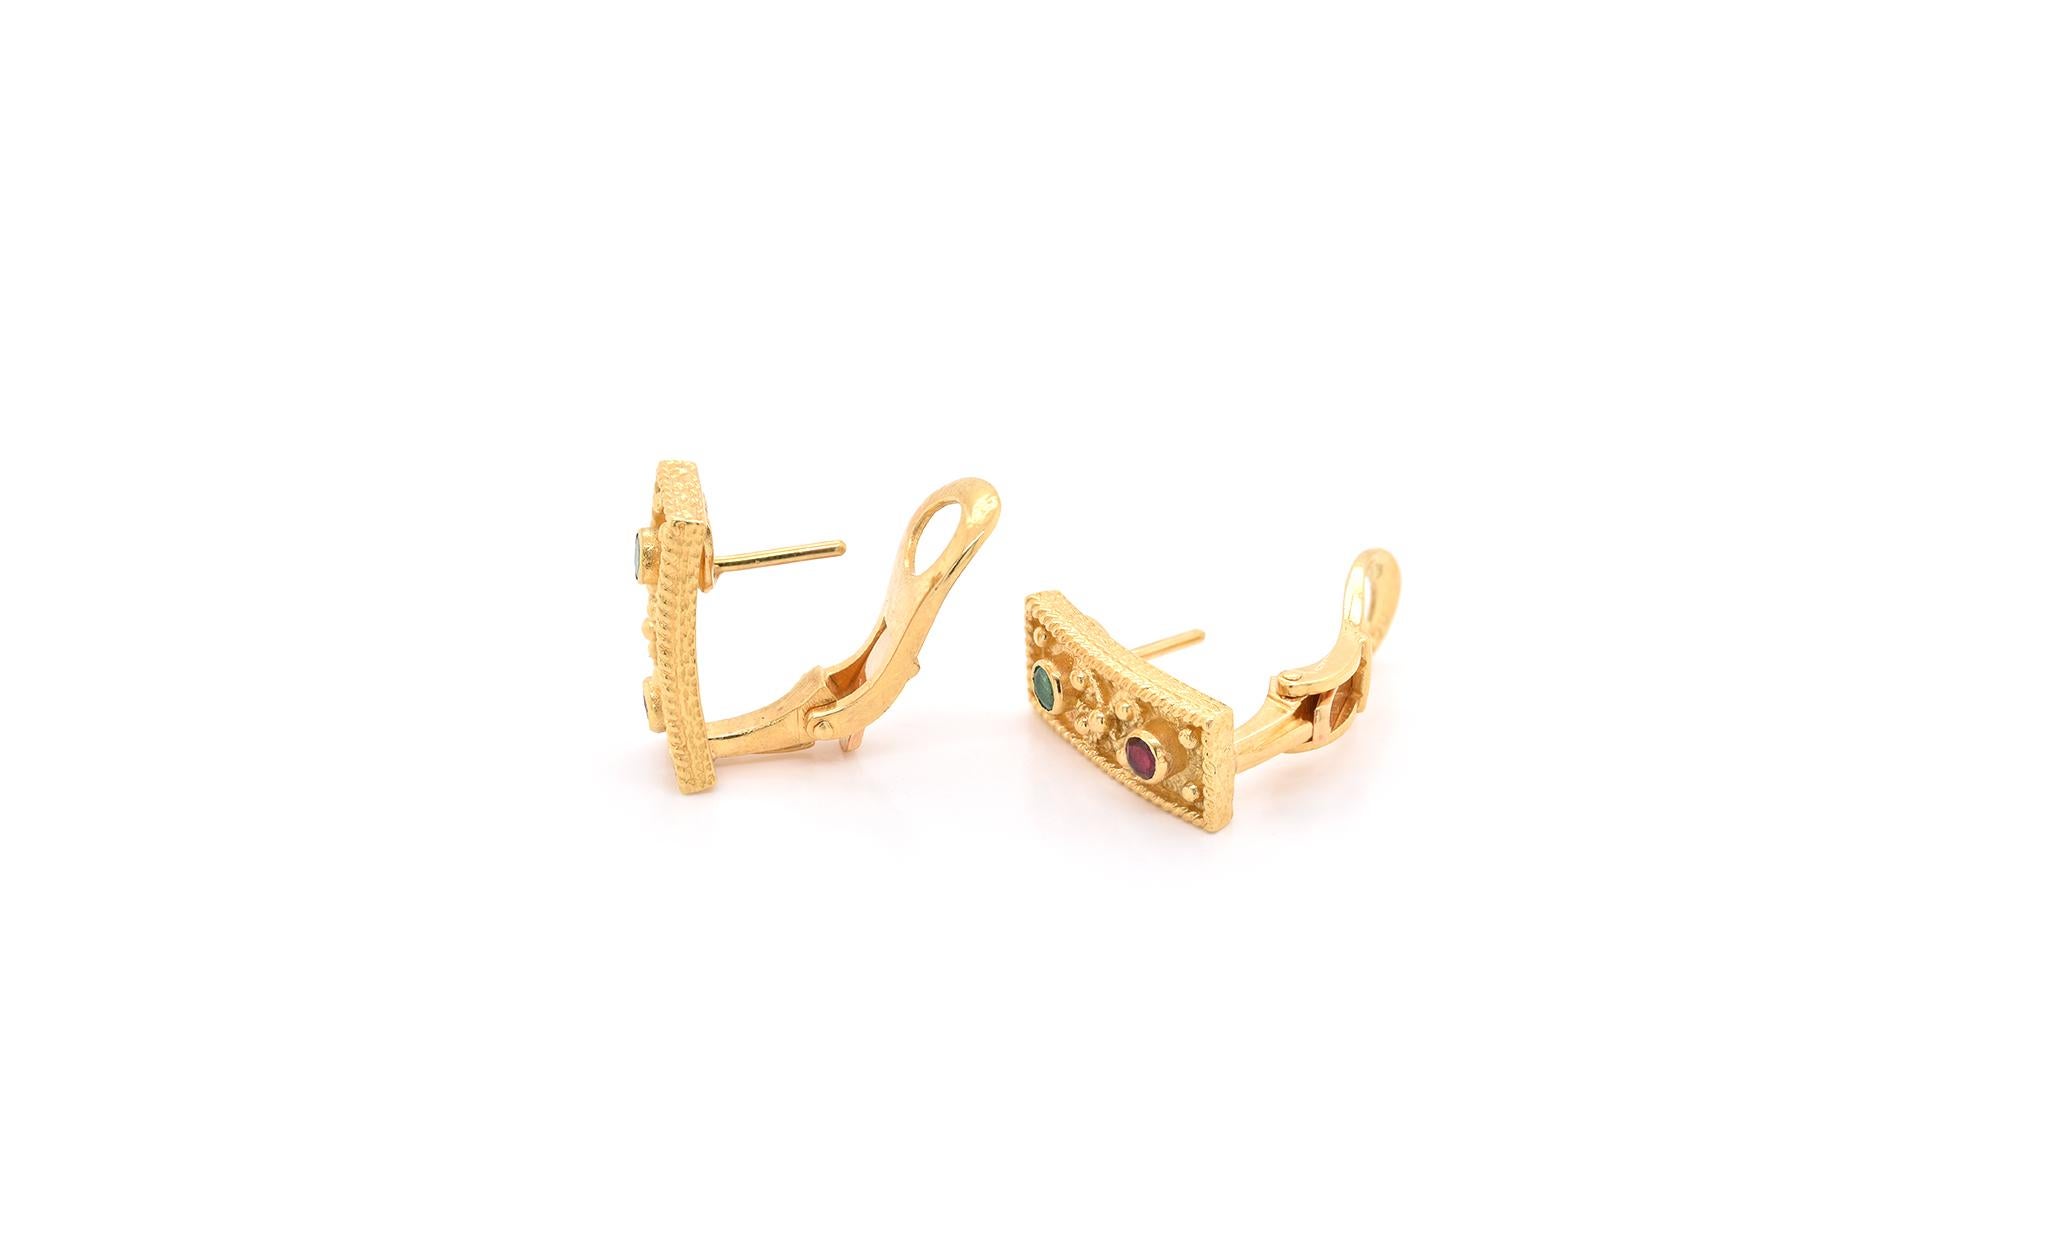 Designer: custom
Material: 18k yellow gold
Gemstones: ruby, emerald = 0.25cttw
Dimensions: earrings measure 7.40mm x 17.62mm
Fastenings: post with omega back
Weight: 9.11 grams
